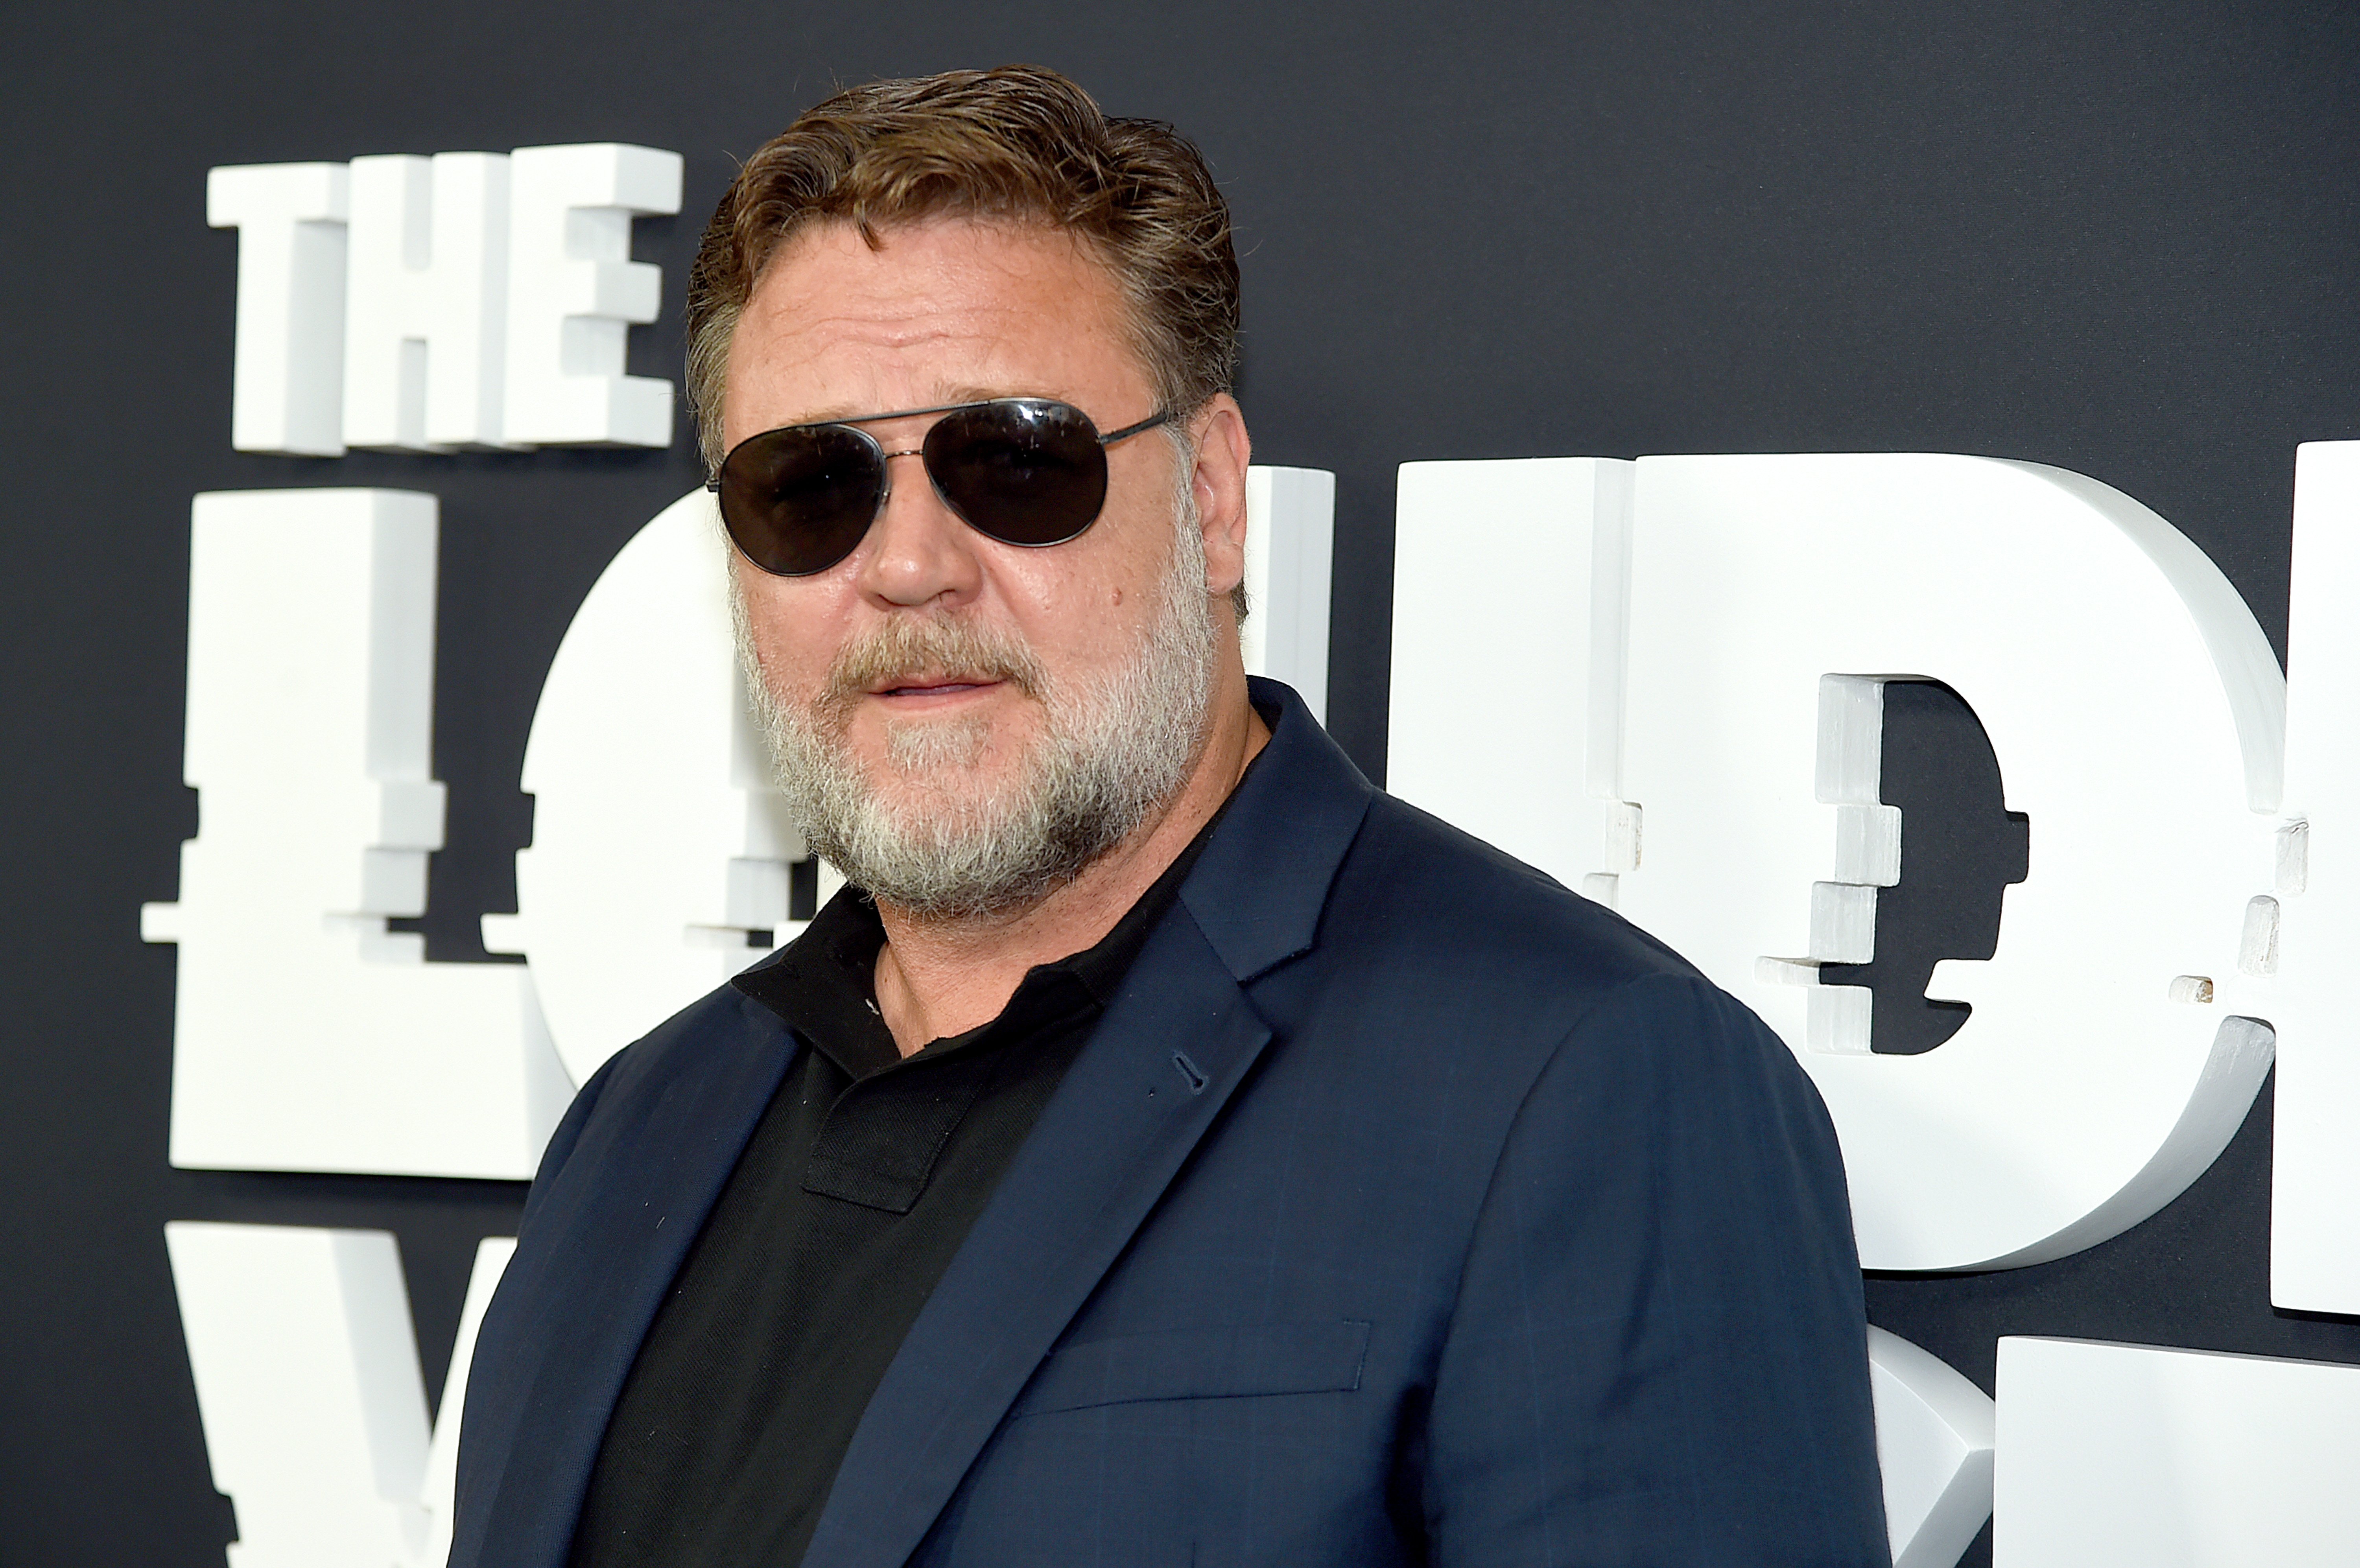 Russell Crowe attends "The Loudest Voice" New York Premiere at Paris Theatre on June 24, 2019, in New York City. | Source: Getty Images